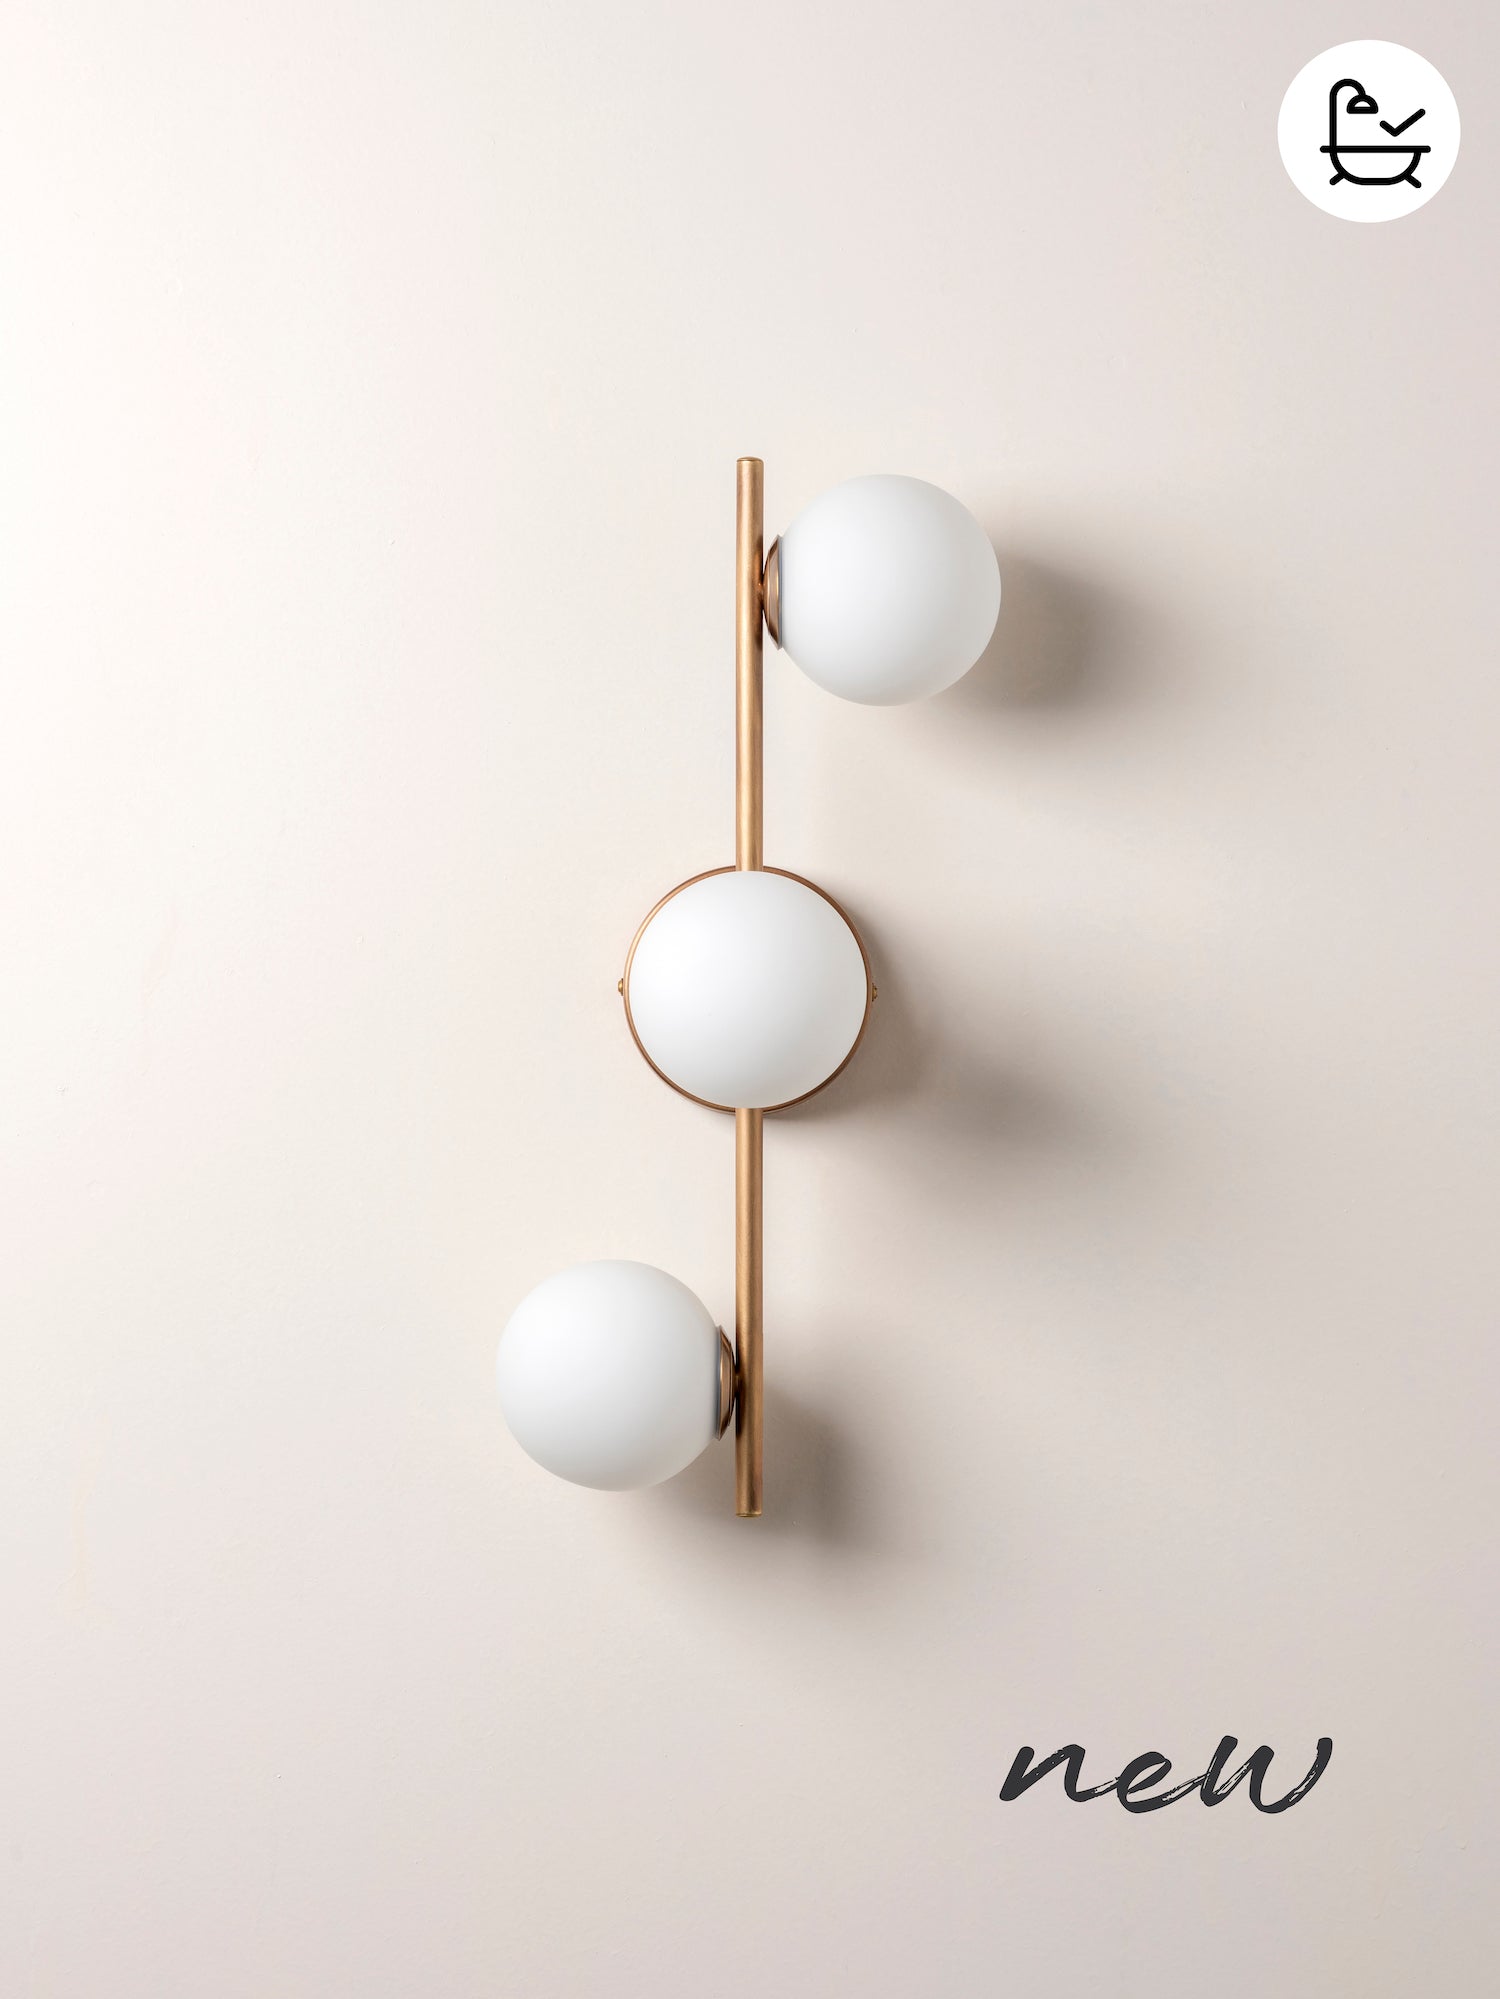 Coro - 3 light aged brass and opal ceiling / wall | Ceiling Light | Lights & Lamps | UK